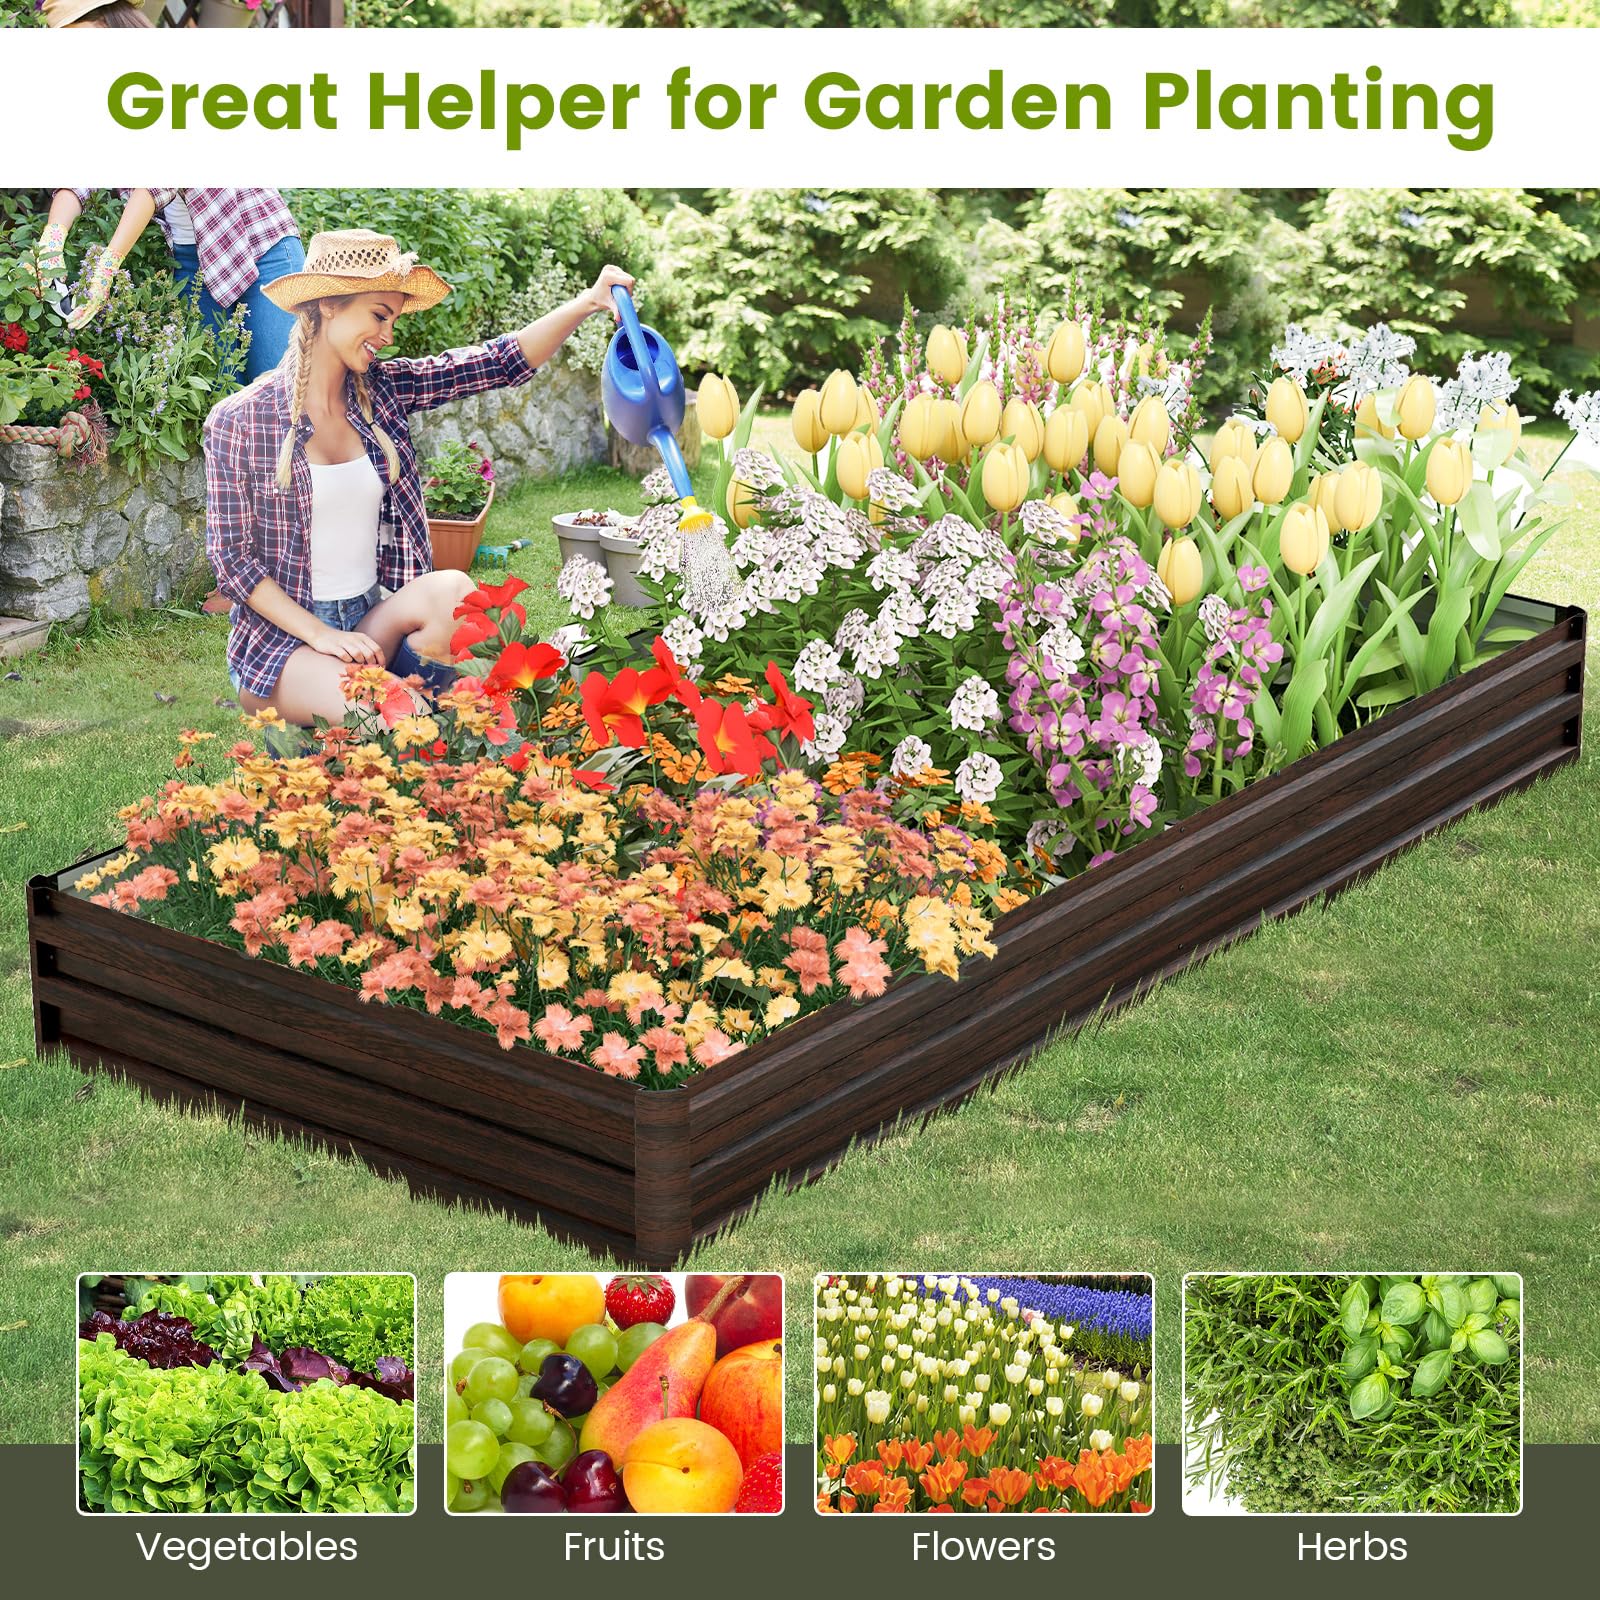 Giantex 8x4x1ft Metal Raised Garden Bed, Planter Box with Protective Edges